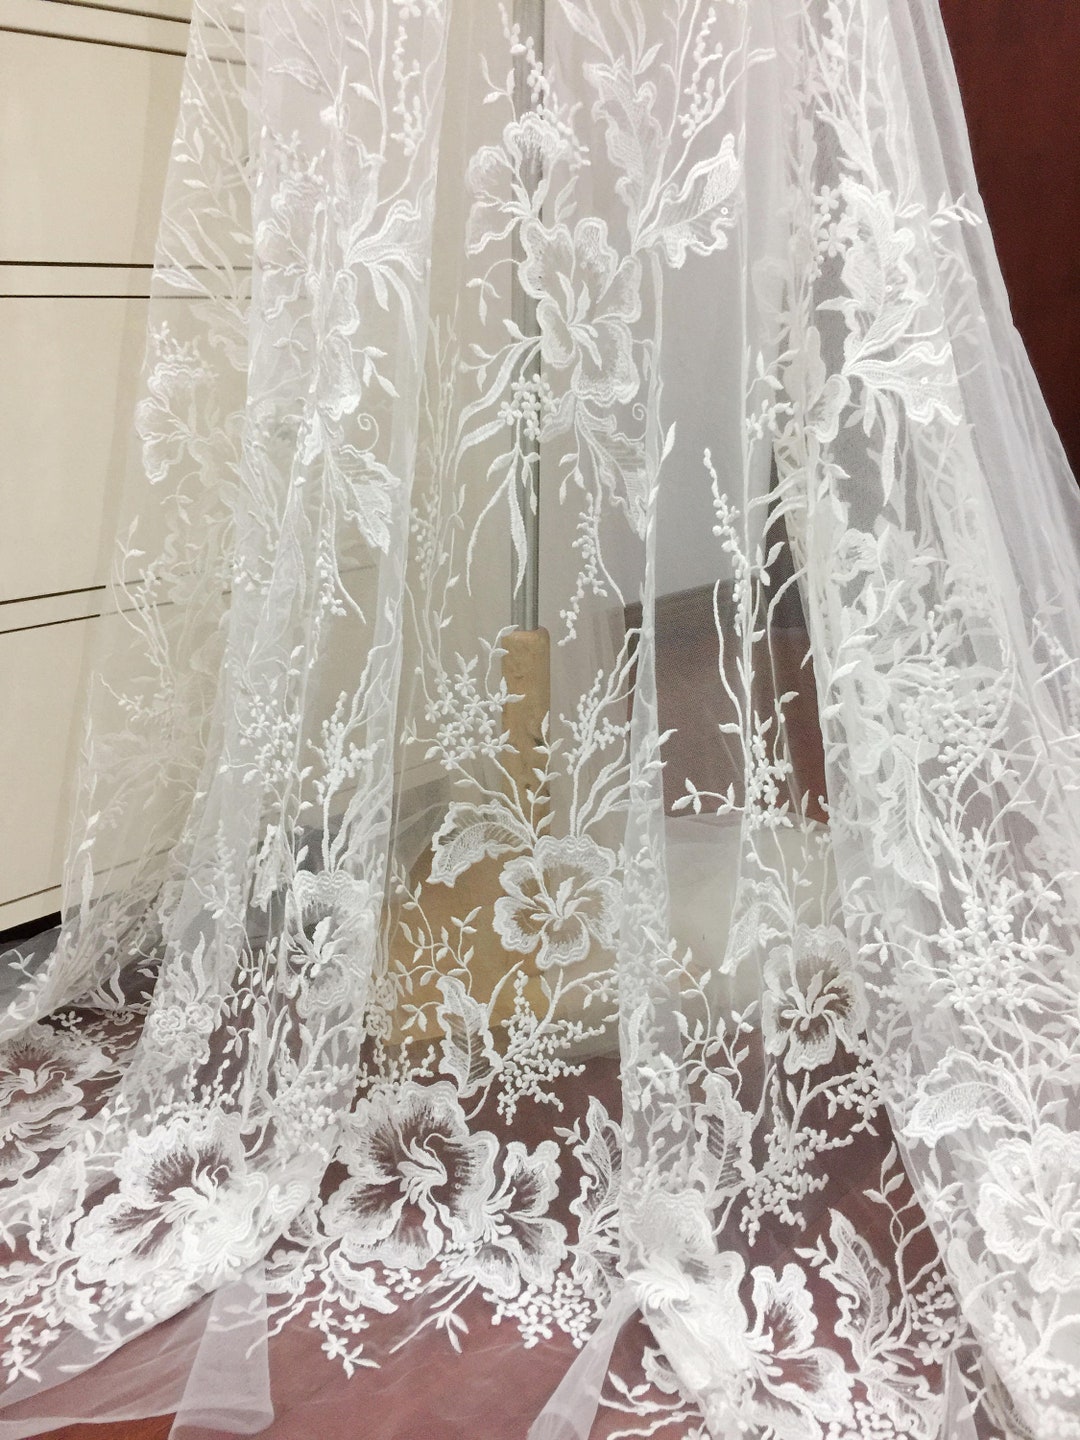 1 Yard Clear Sequin Wedding Lace Tulle Embroidery Floral Off-white